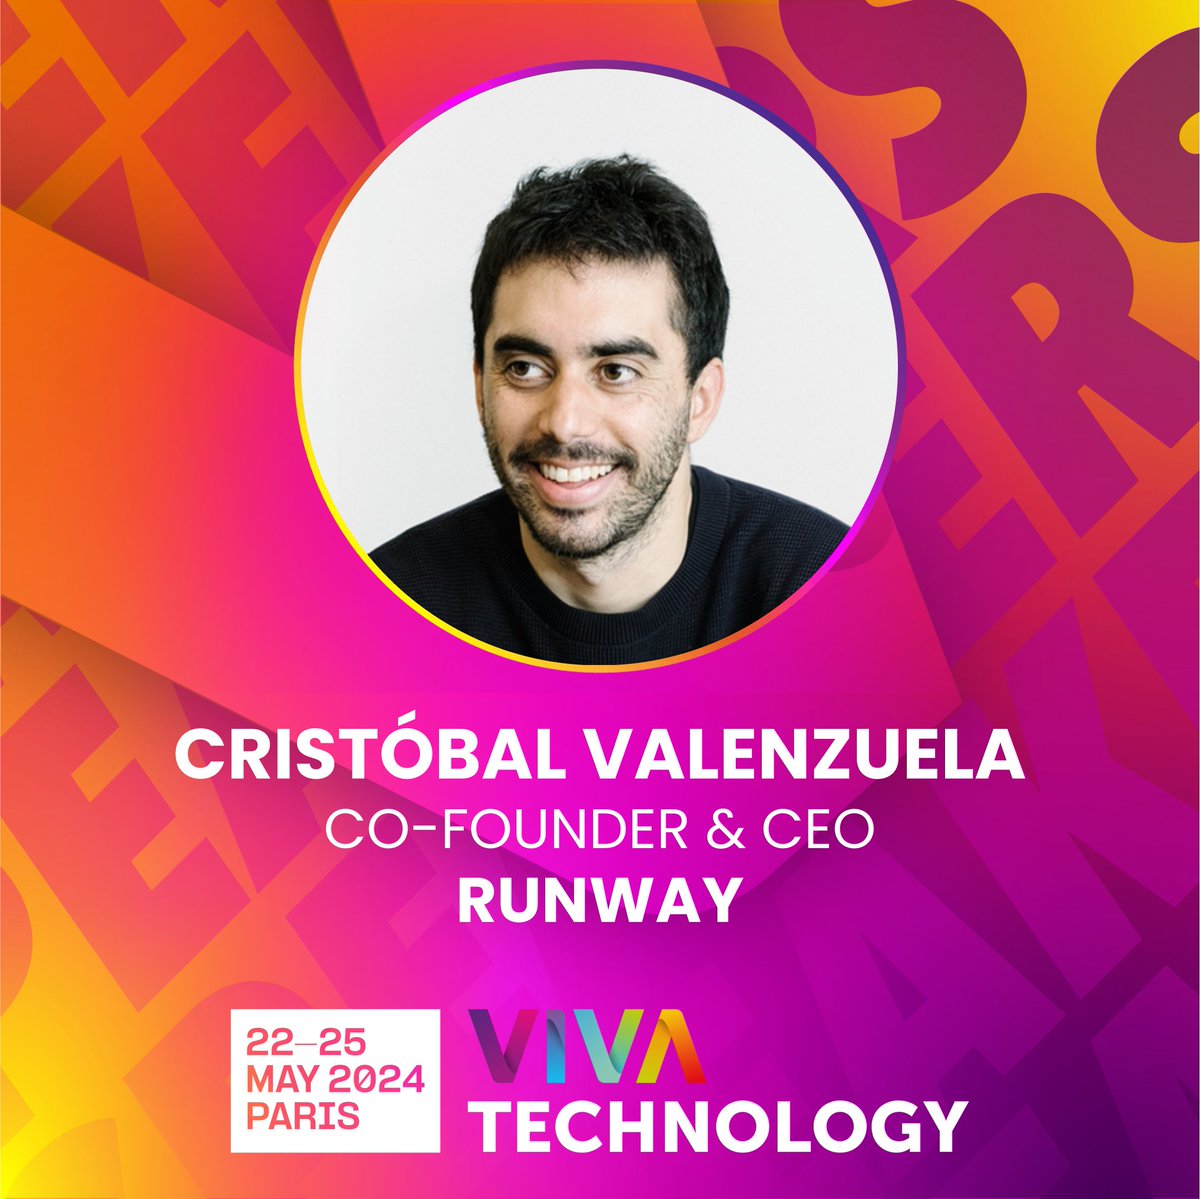 We're excited to announce that @c_valenzuelab, CEO @runwayml, will be at #VivaTech! As the co-creator of game-changing AI tools like Stable Diffusion & Gen-1, used in academy-nominated movies & hit TV shows, join us for insights into the exciting possibilities AI brings 🚀